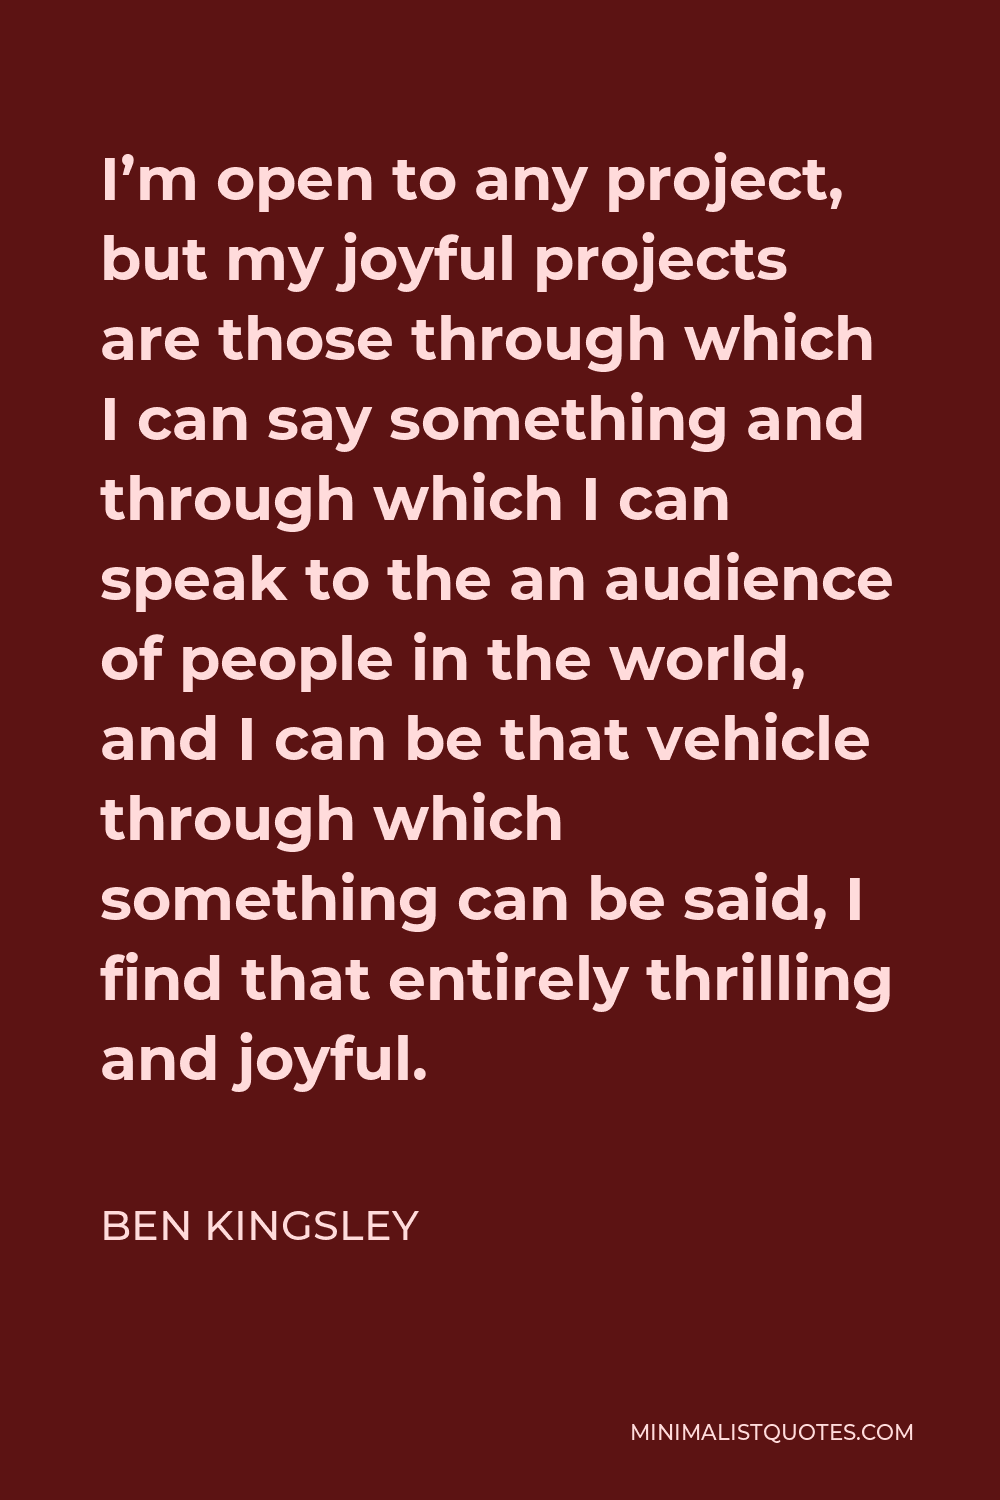 Ben Kingsley Quote - I’m open to any project, but my joyful projects are those through which I can say something and through which I can speak to the an audience of people in the world, and I can be that vehicle through which something can be said, I find that entirely thrilling and joyful.